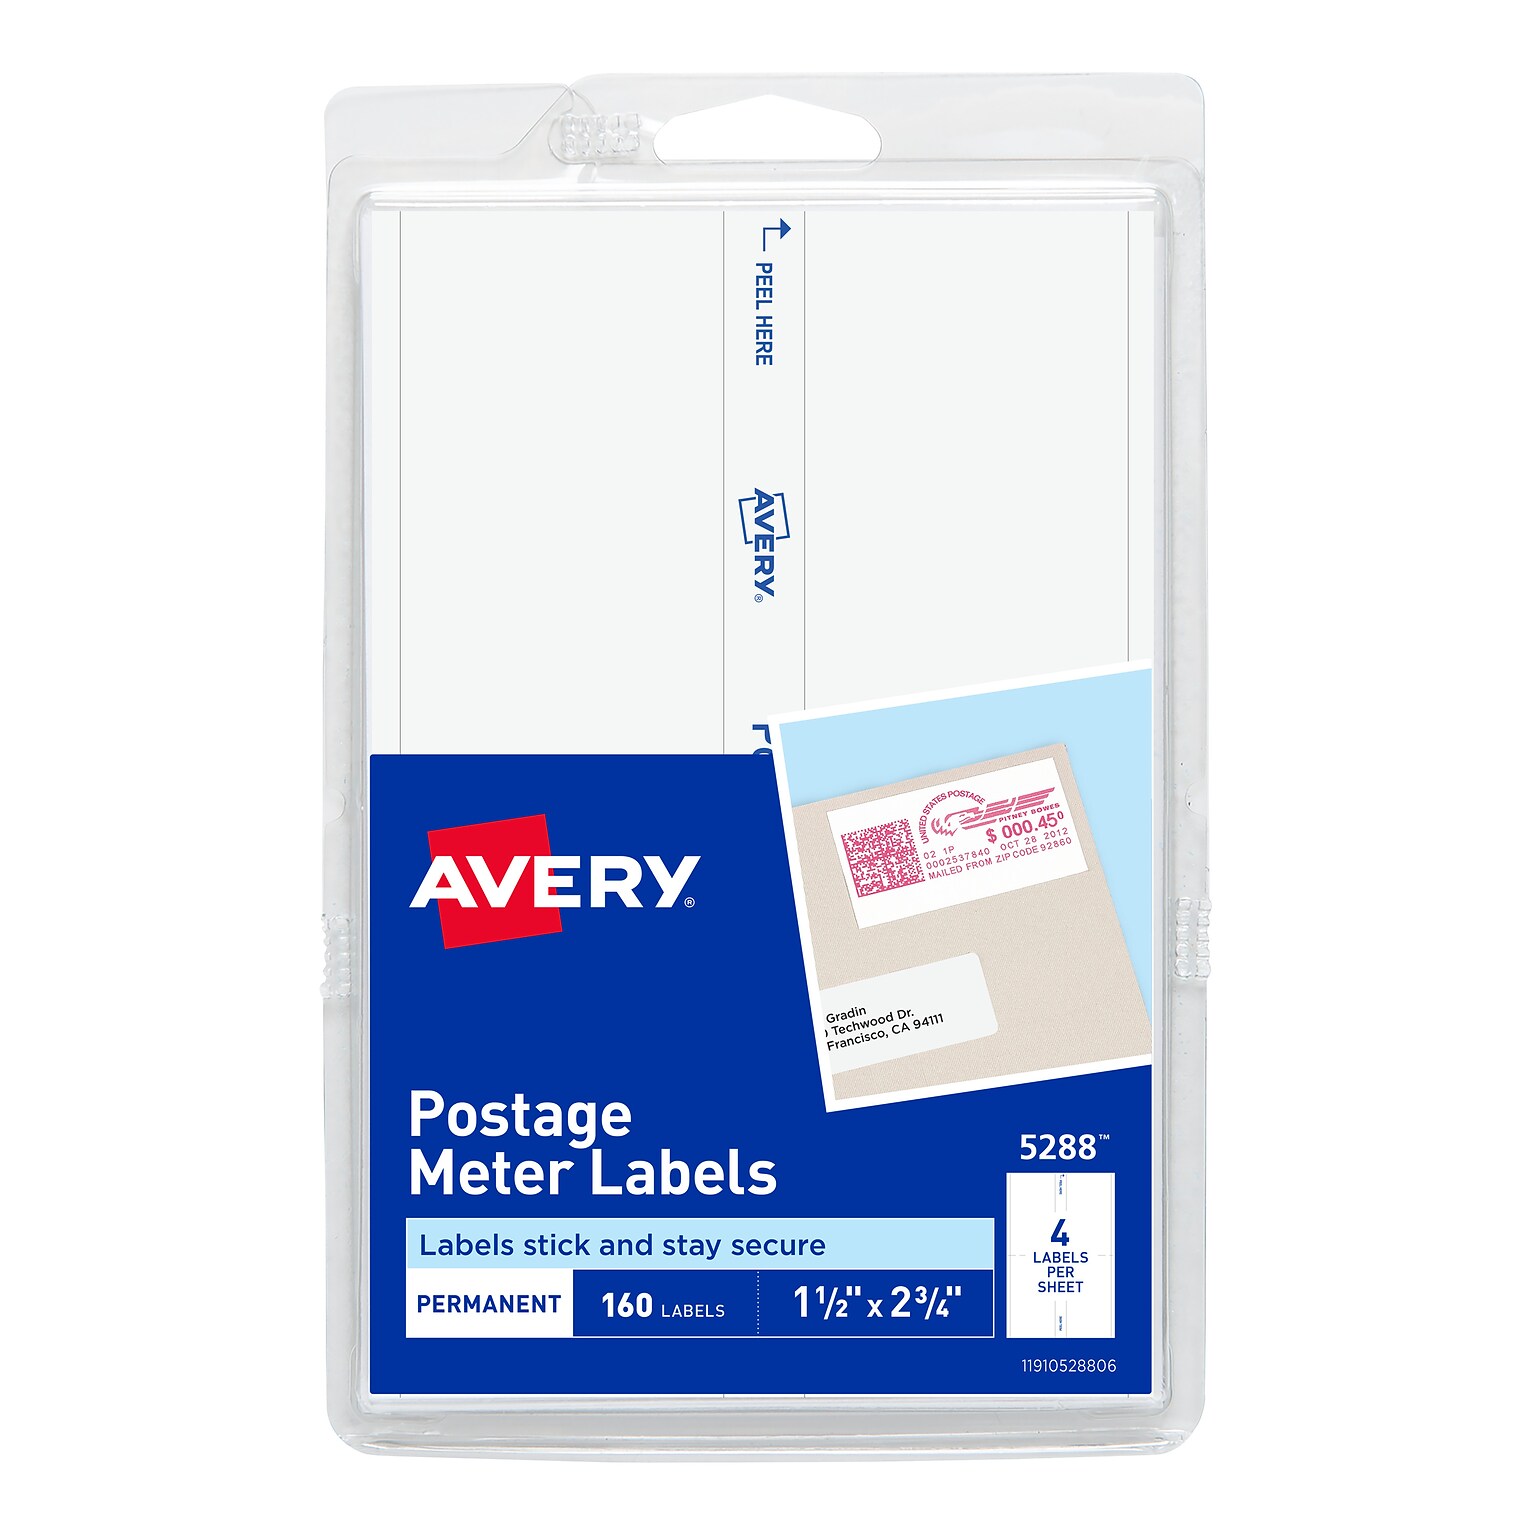 Avery Postage Meter Labels, 1-1/2 x 2-3/4, White, 4 Labels/Sheet, 40 Sheets/Pack, 160 Labels/Pack (5288)